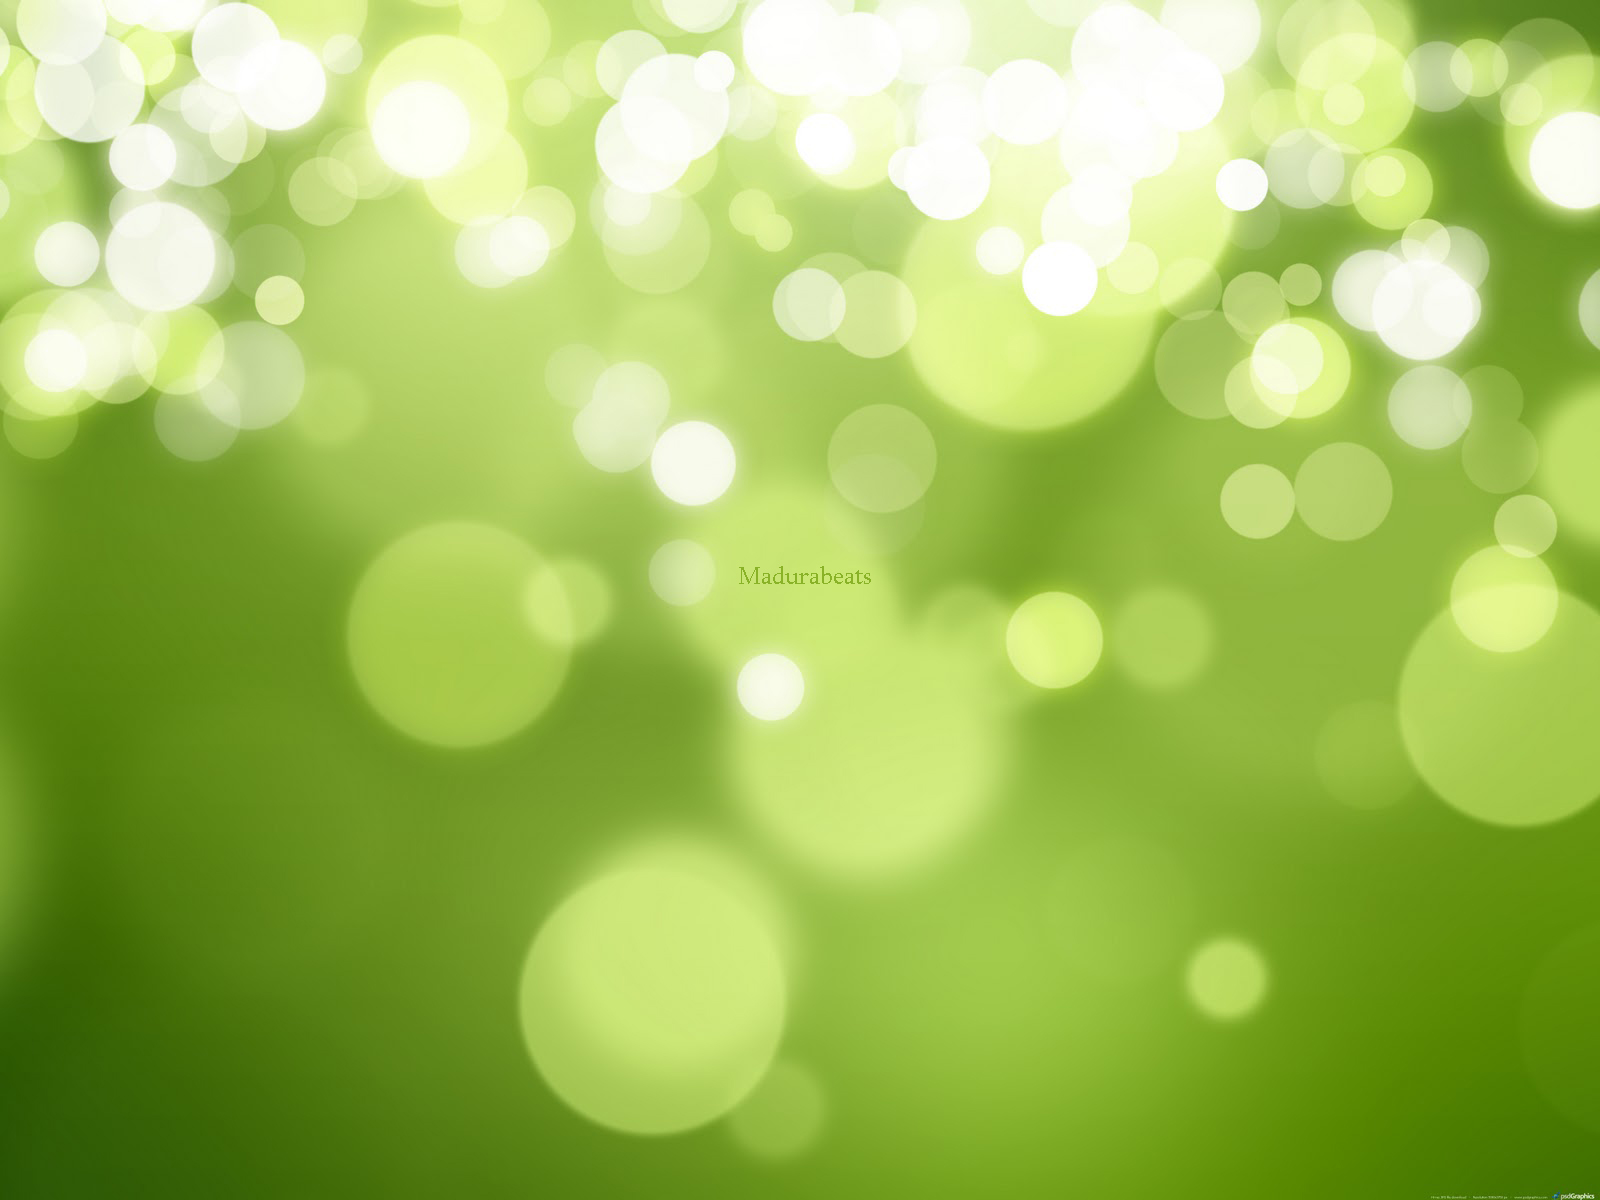 Use As A Desktop Wallpaper Green Color Will Make You Be With Nature